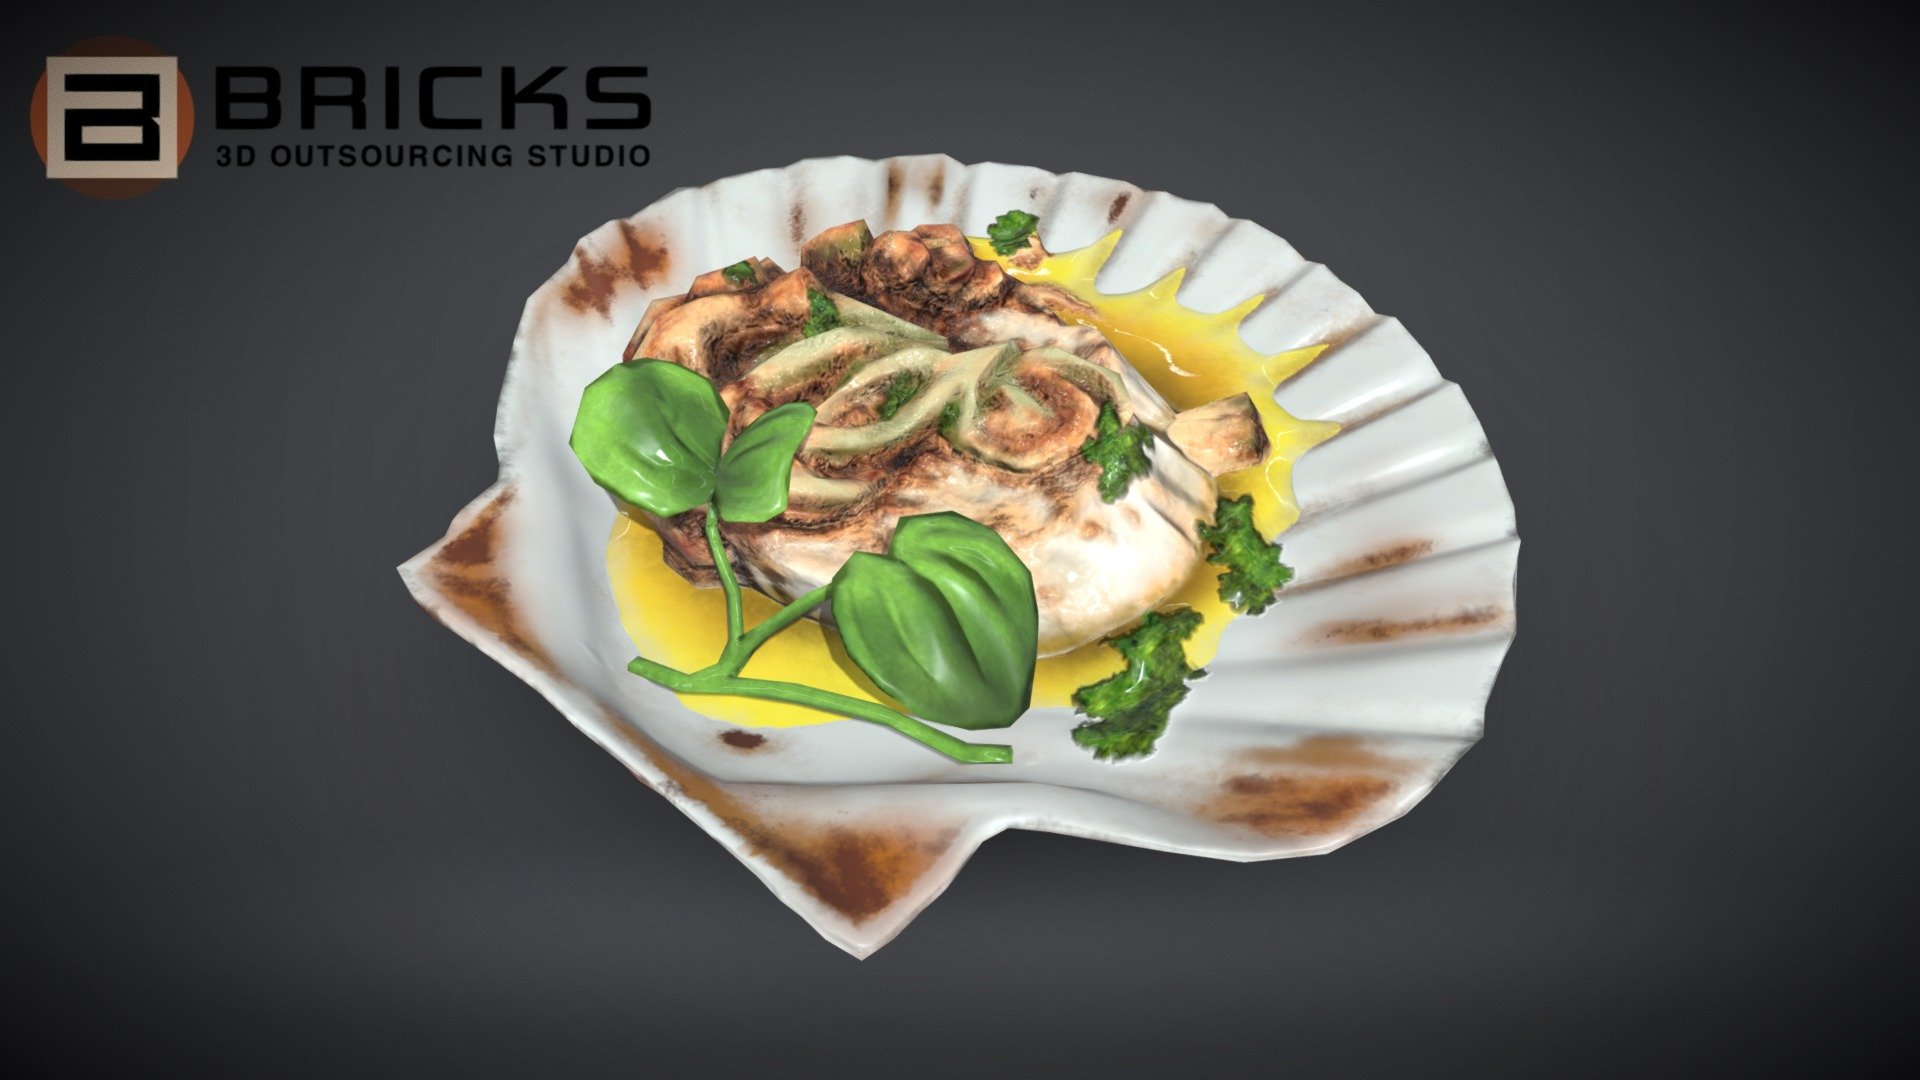 PBR Food Asset:
ScallopGrilledButter
Polycount: 1592
Vertex count: 800
Texture Size: 2048px x 2048px
Normal: OpenGL

If you need any adjust in file please contact us: team@bricks3dstudio.com

Hire us: tringuyen@bricks3dstudio.com
Here is us: https://www.bricks3dstudio.com/
        https://www.artstation.com/bricksstudio
        https://www.facebook.com/Bricks3dstudio/
        https://www.linkedin.com/in/bricks-studio-b10462252/ - ScallopGrilledButter - Buy Royalty Free 3D model by Bricks Studio (@bricks3dstudio) 3d model